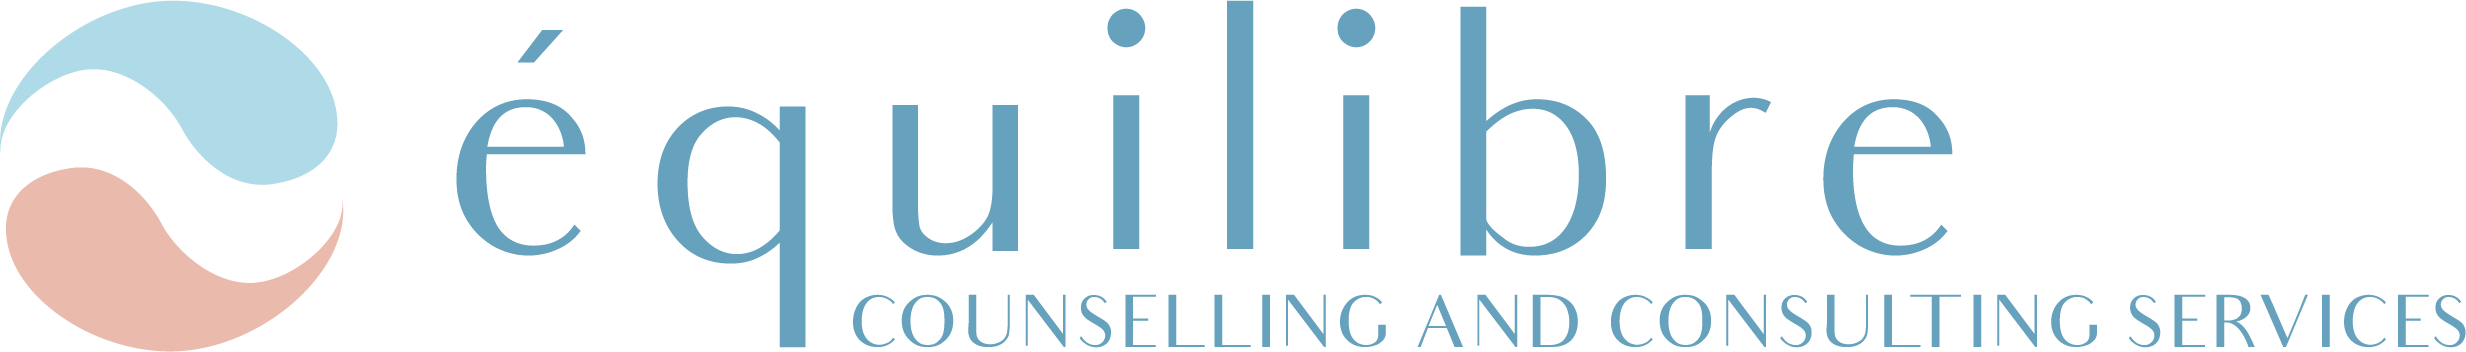 Equilibre Counselling and Consulting Services